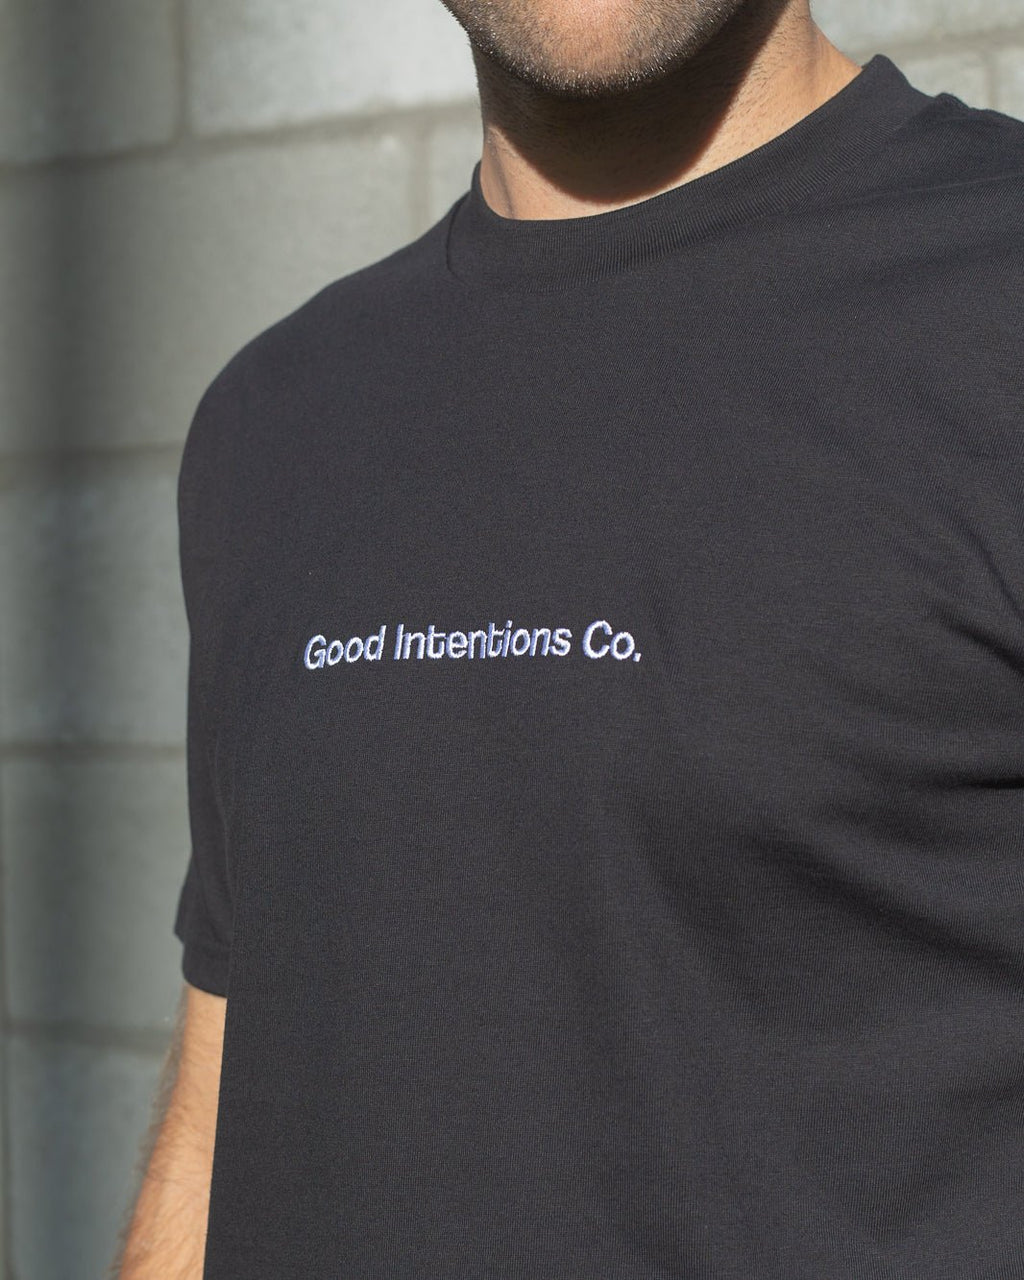 Premium Tee | Good Intentions Co. | Black - Good Intentions Co.